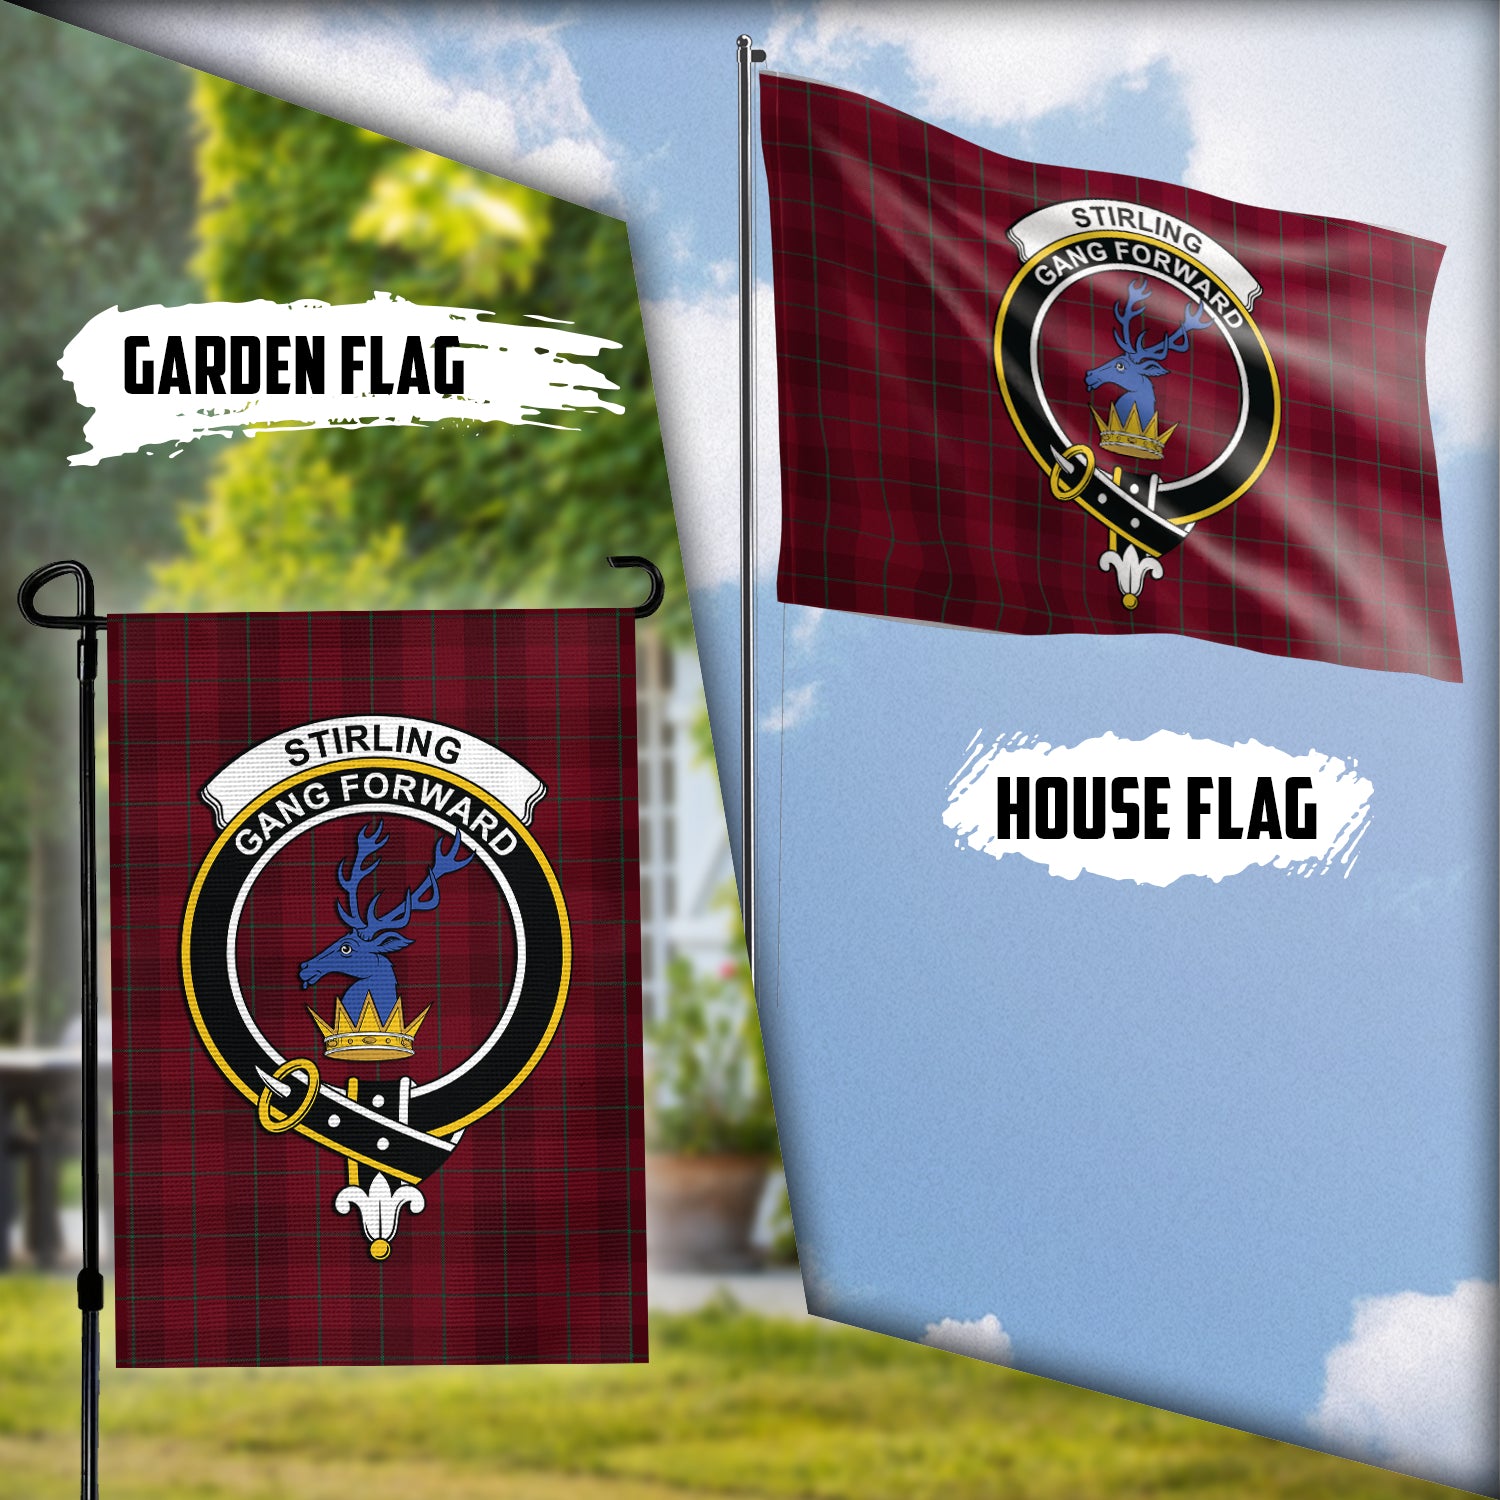 stirling-of-keir-tartan-flag-with-family-crest